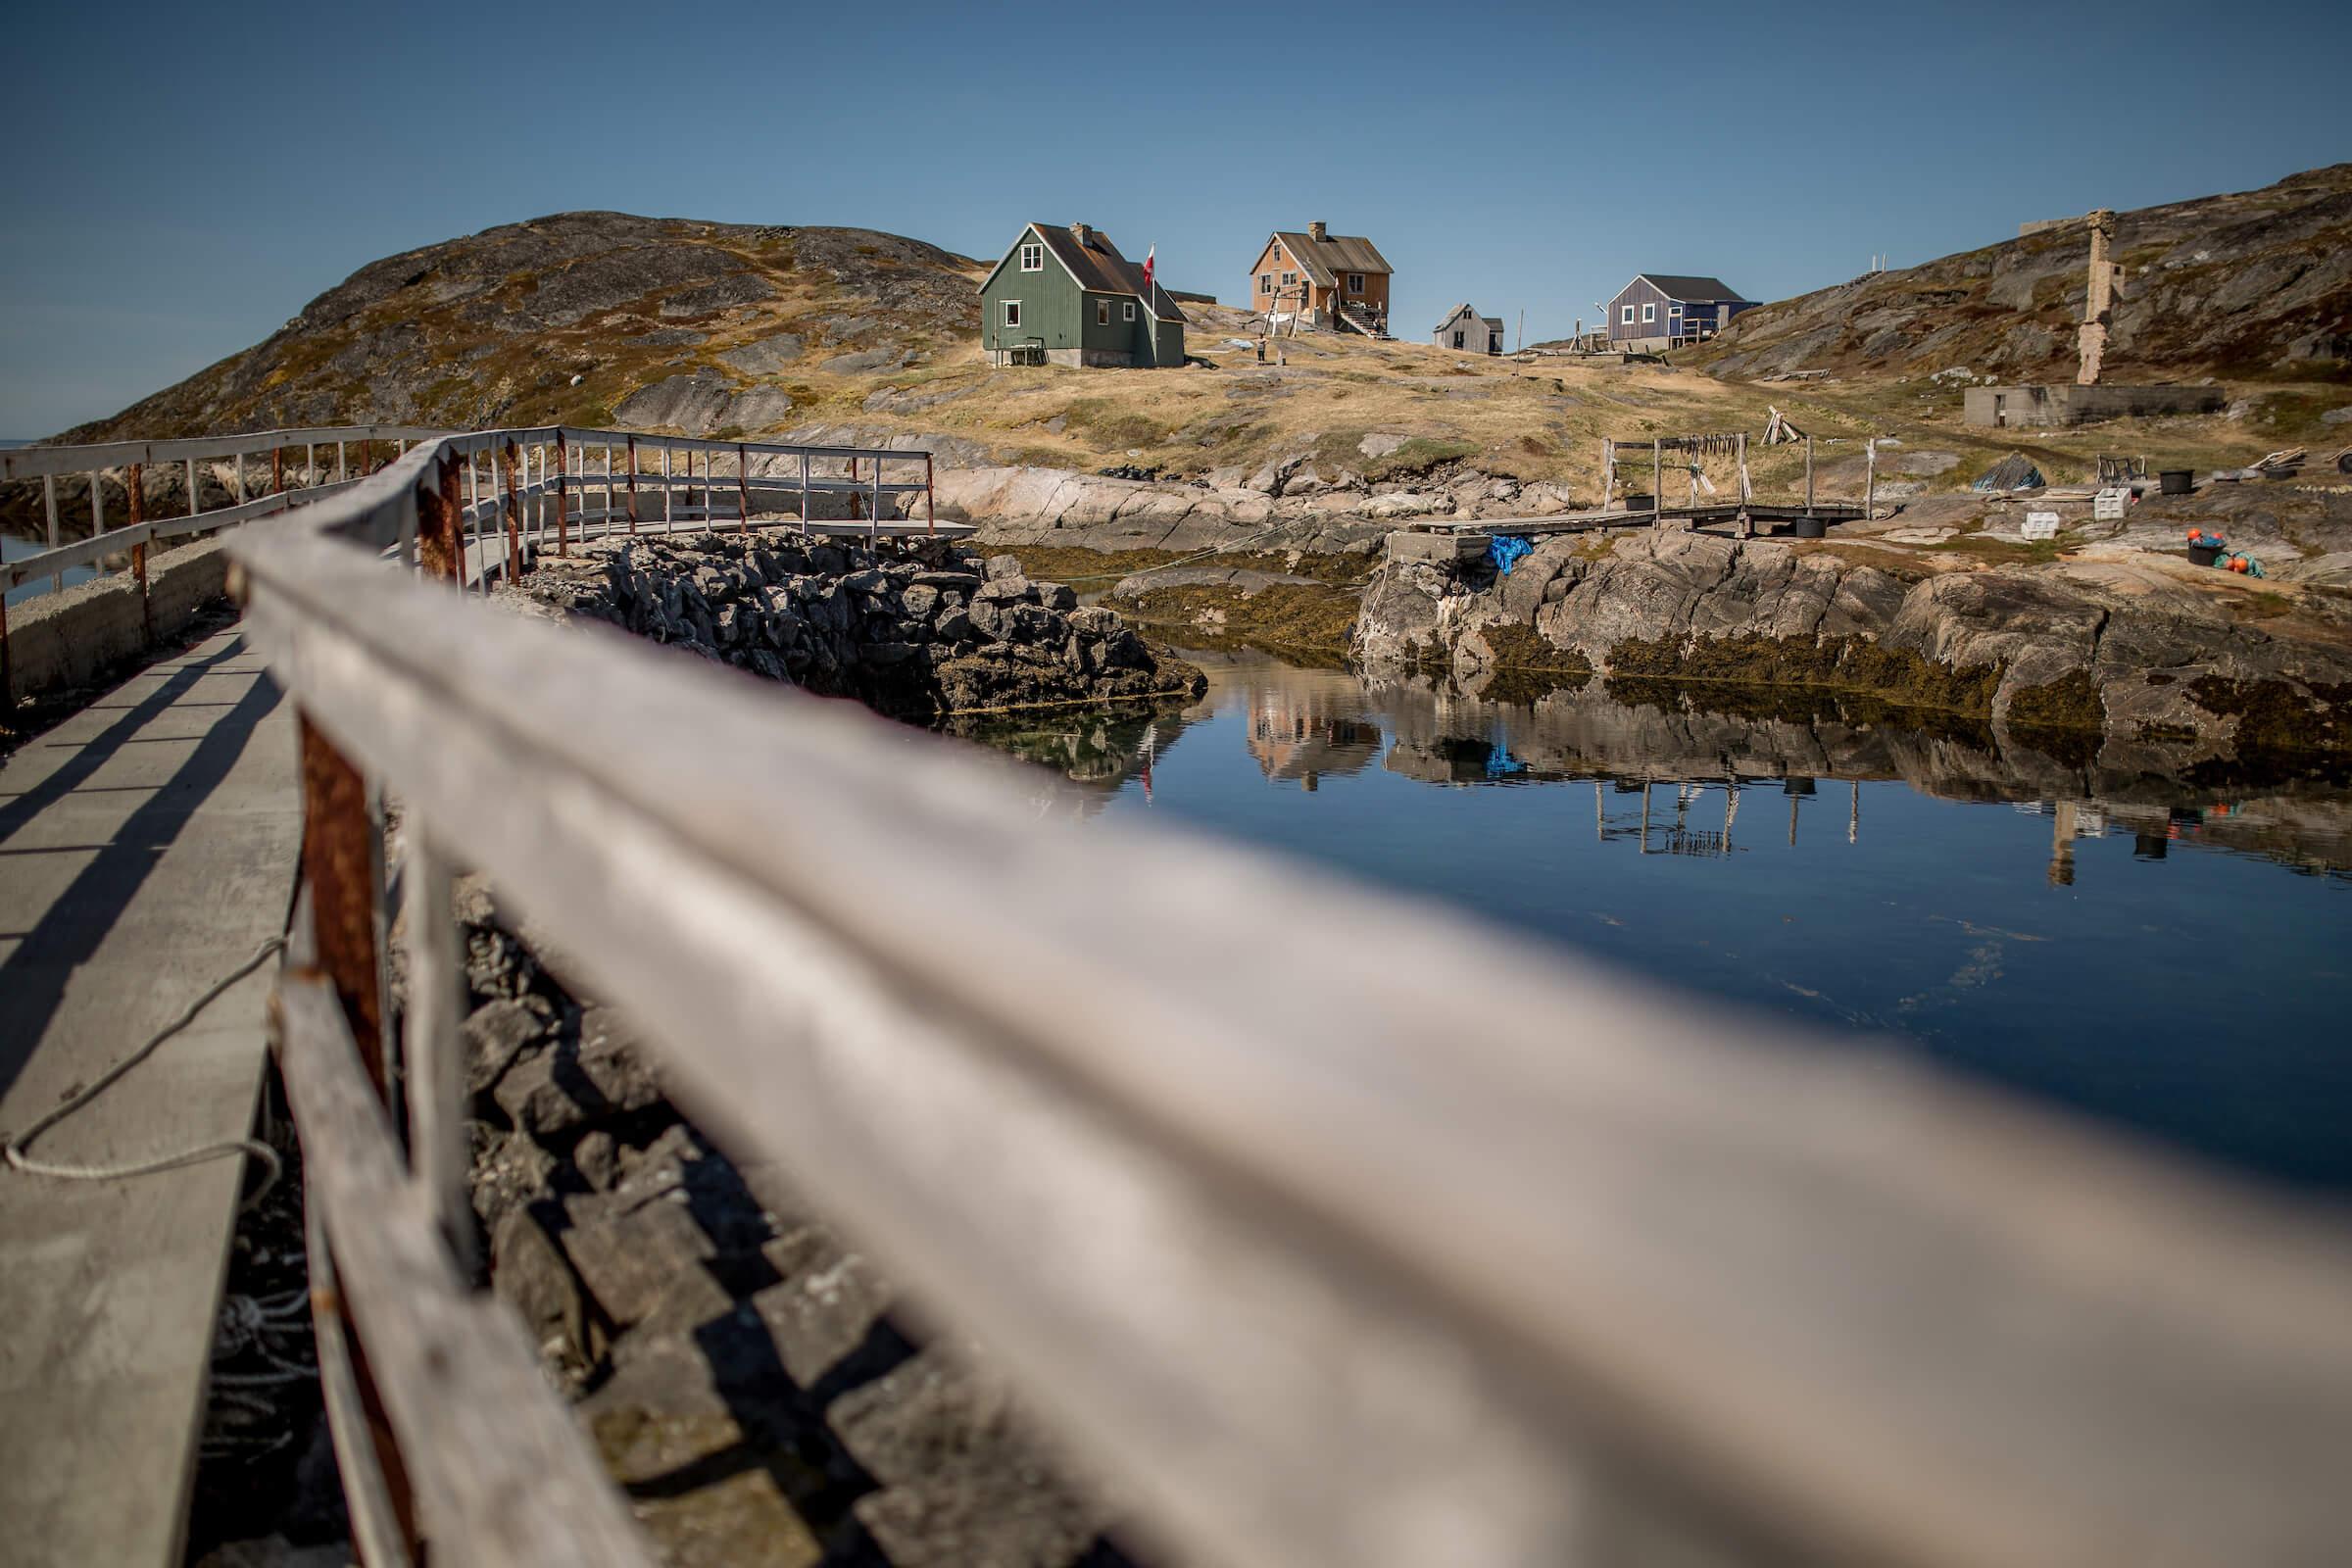 An old bridge in the abandoned village Kangeq near Nuuk in Greenland where some houses are now private holiday homes